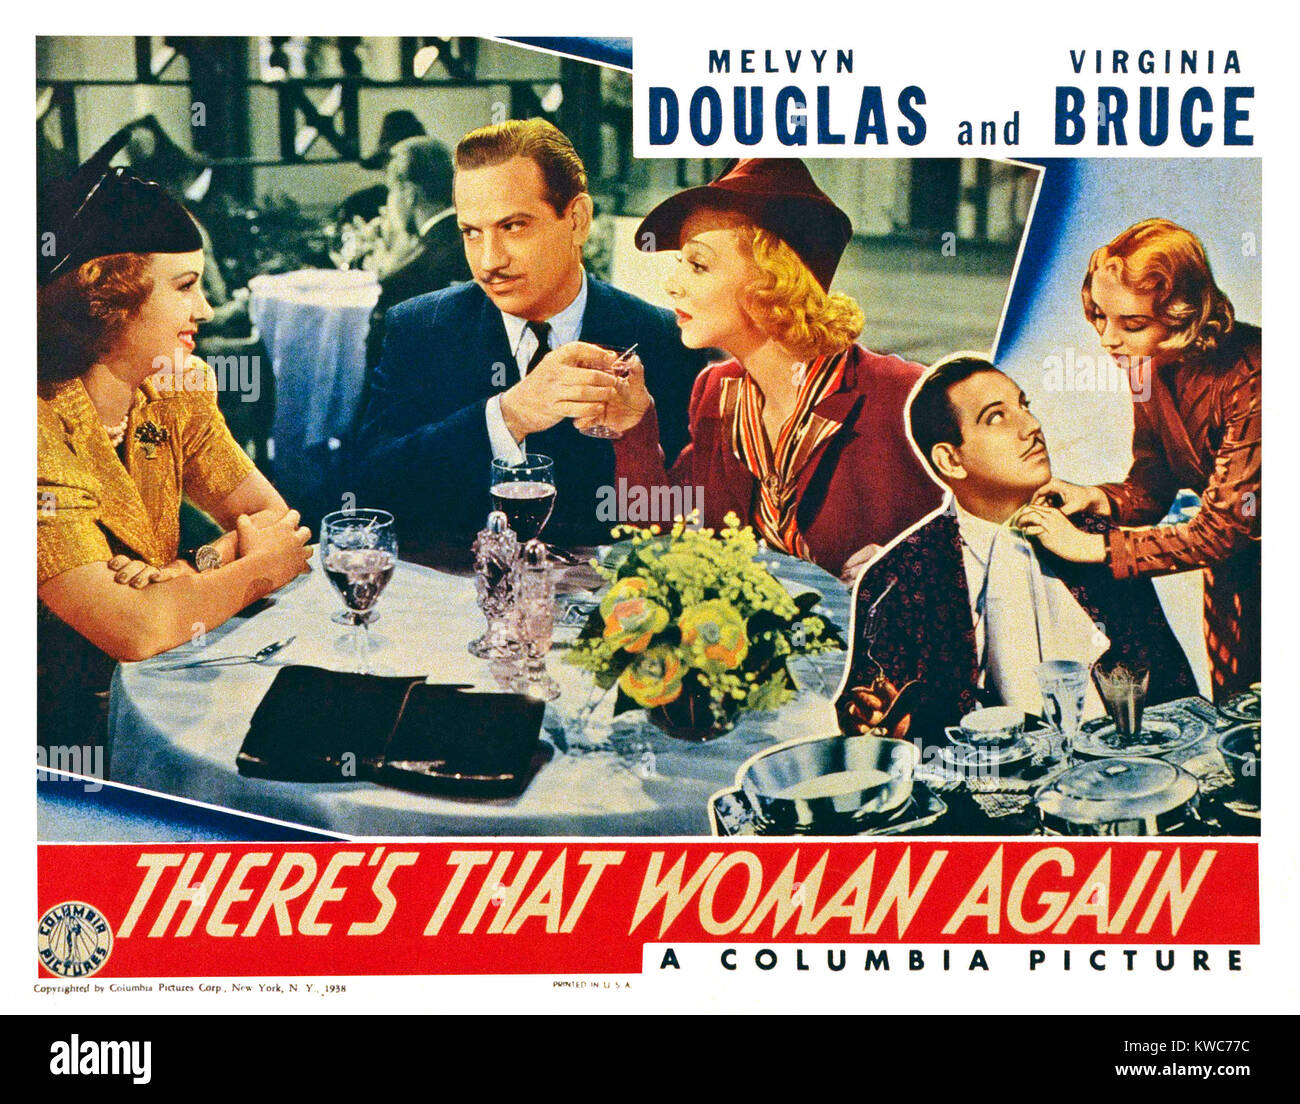 THERE'S THAT WOMAN AGAIN, US lobbycard, from left: Margaret Lindsay, Melvyn Douglas, Virginia Bruce, 1938 Stock Photo